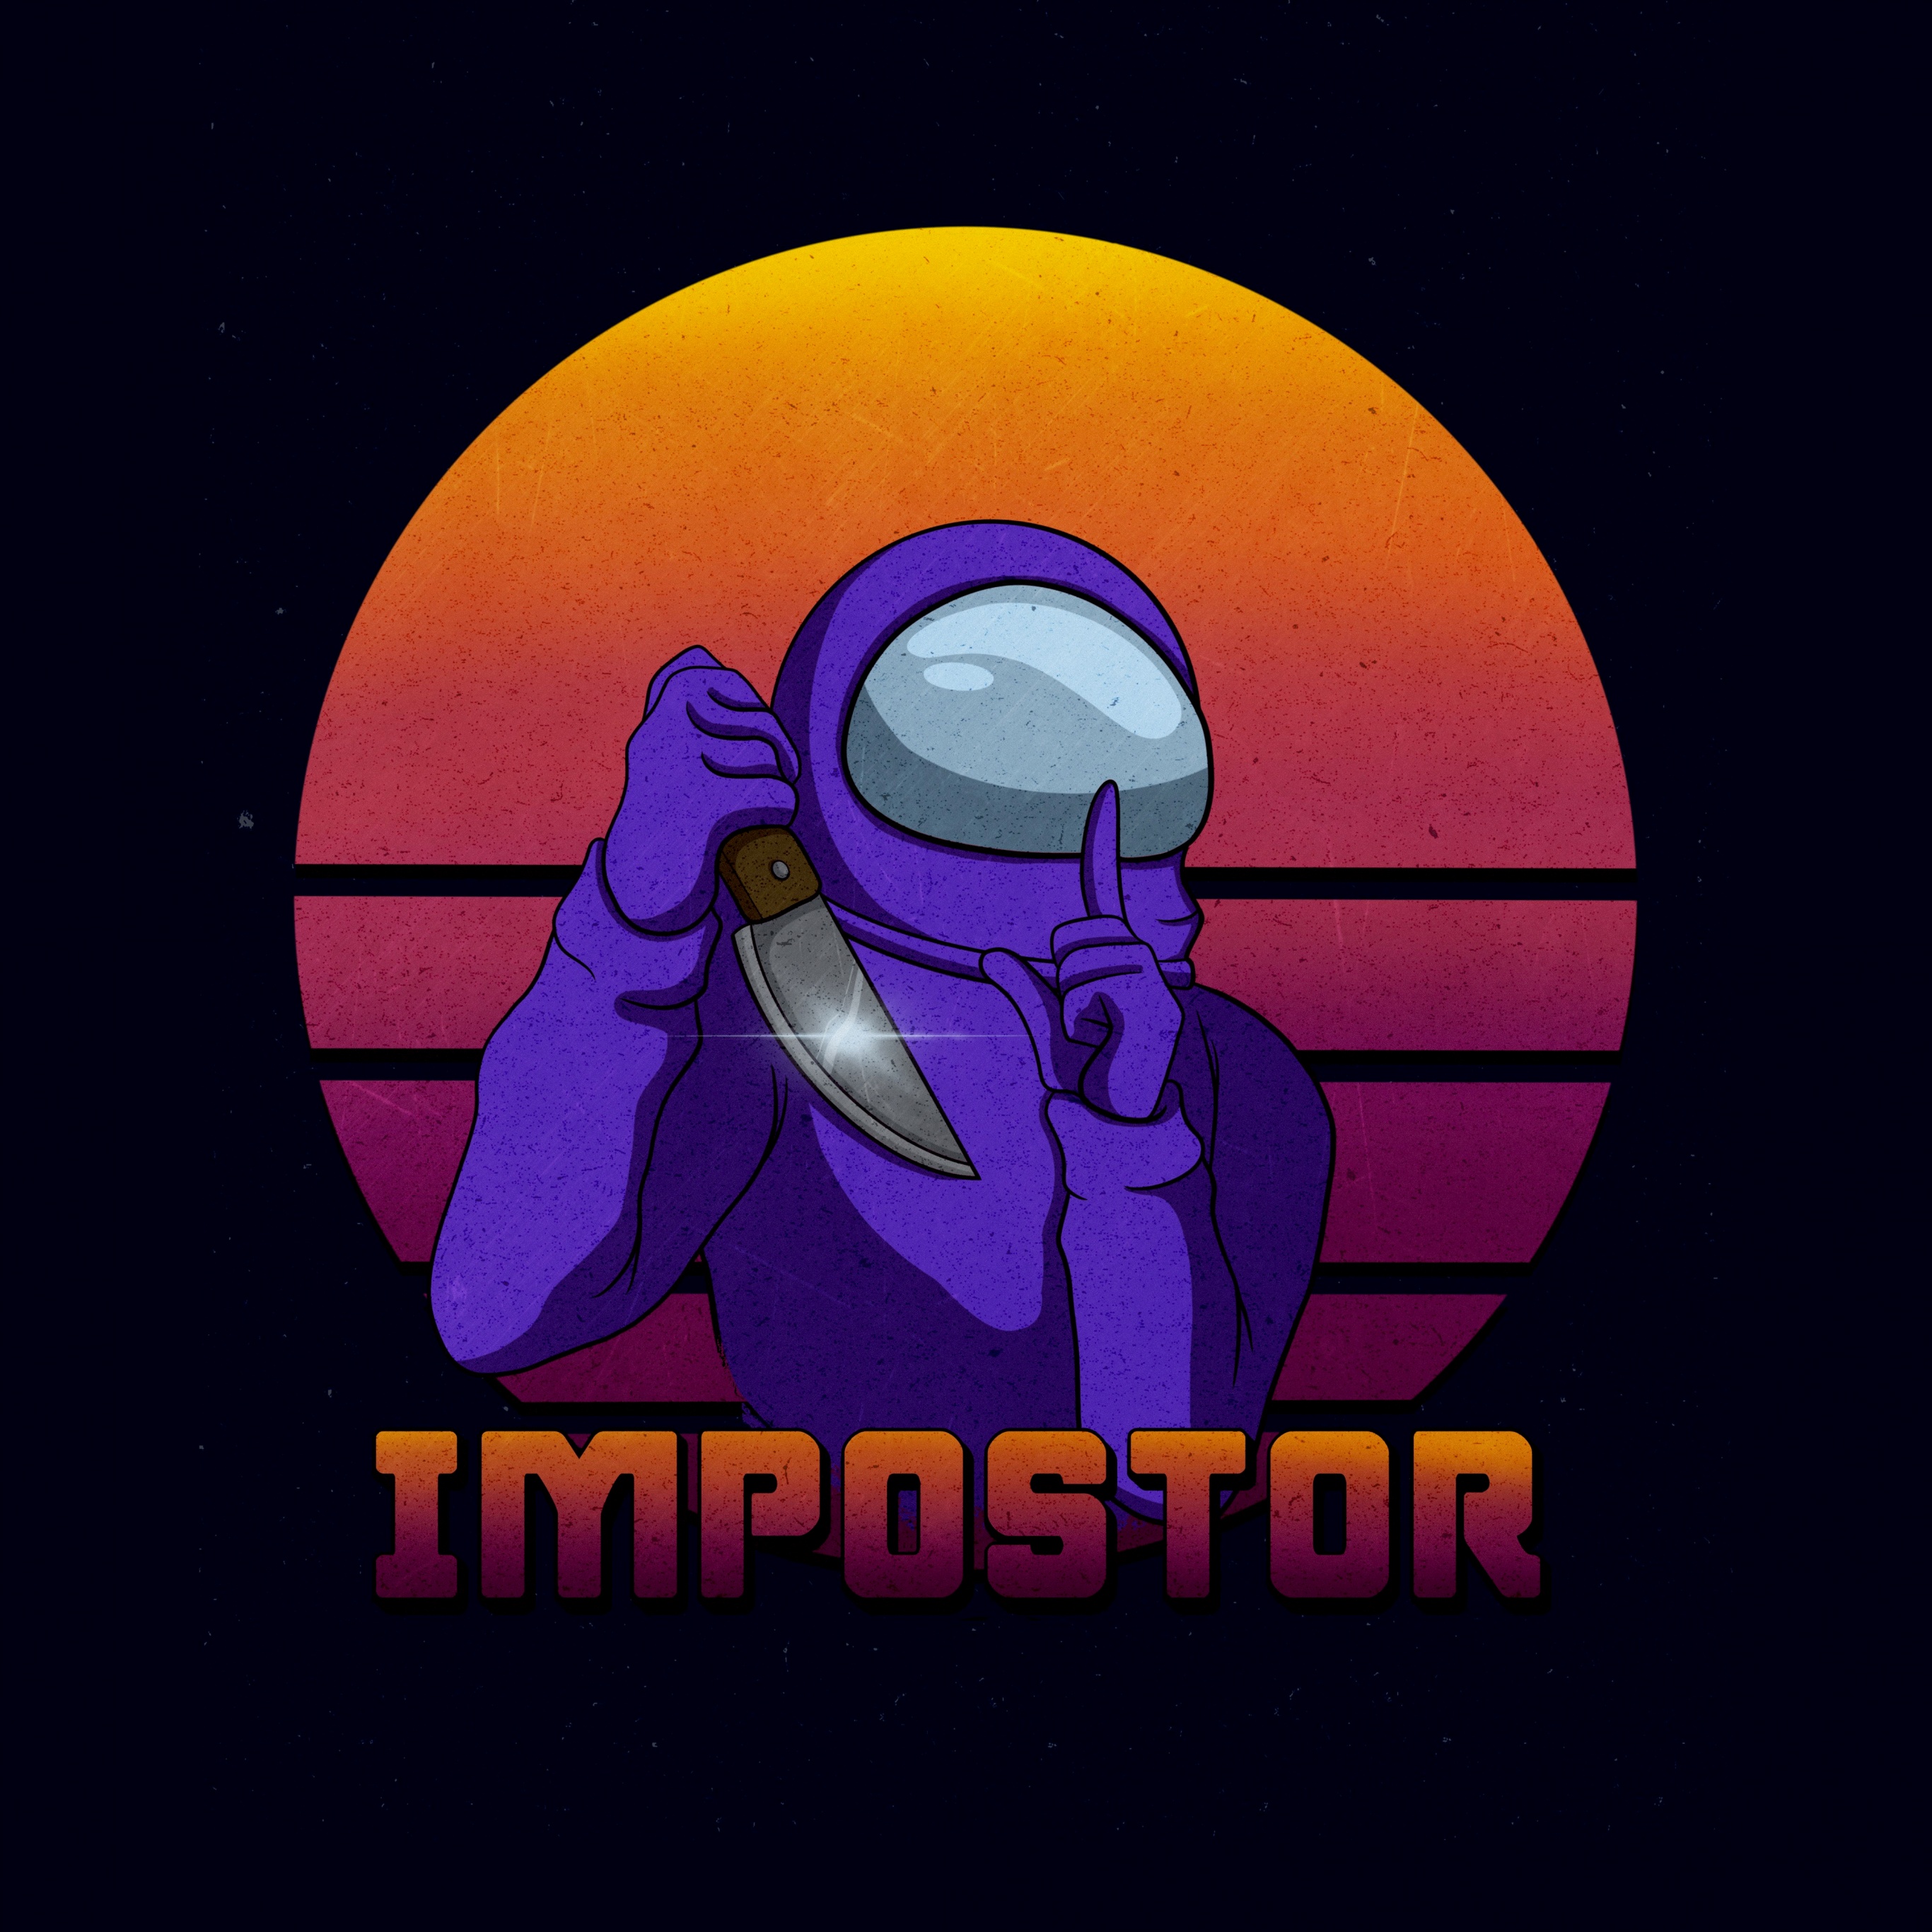 Impostor 4k Wallpaper Among Us Ios Games Android Games Pc Games Black Background 5k 8k Games 3968